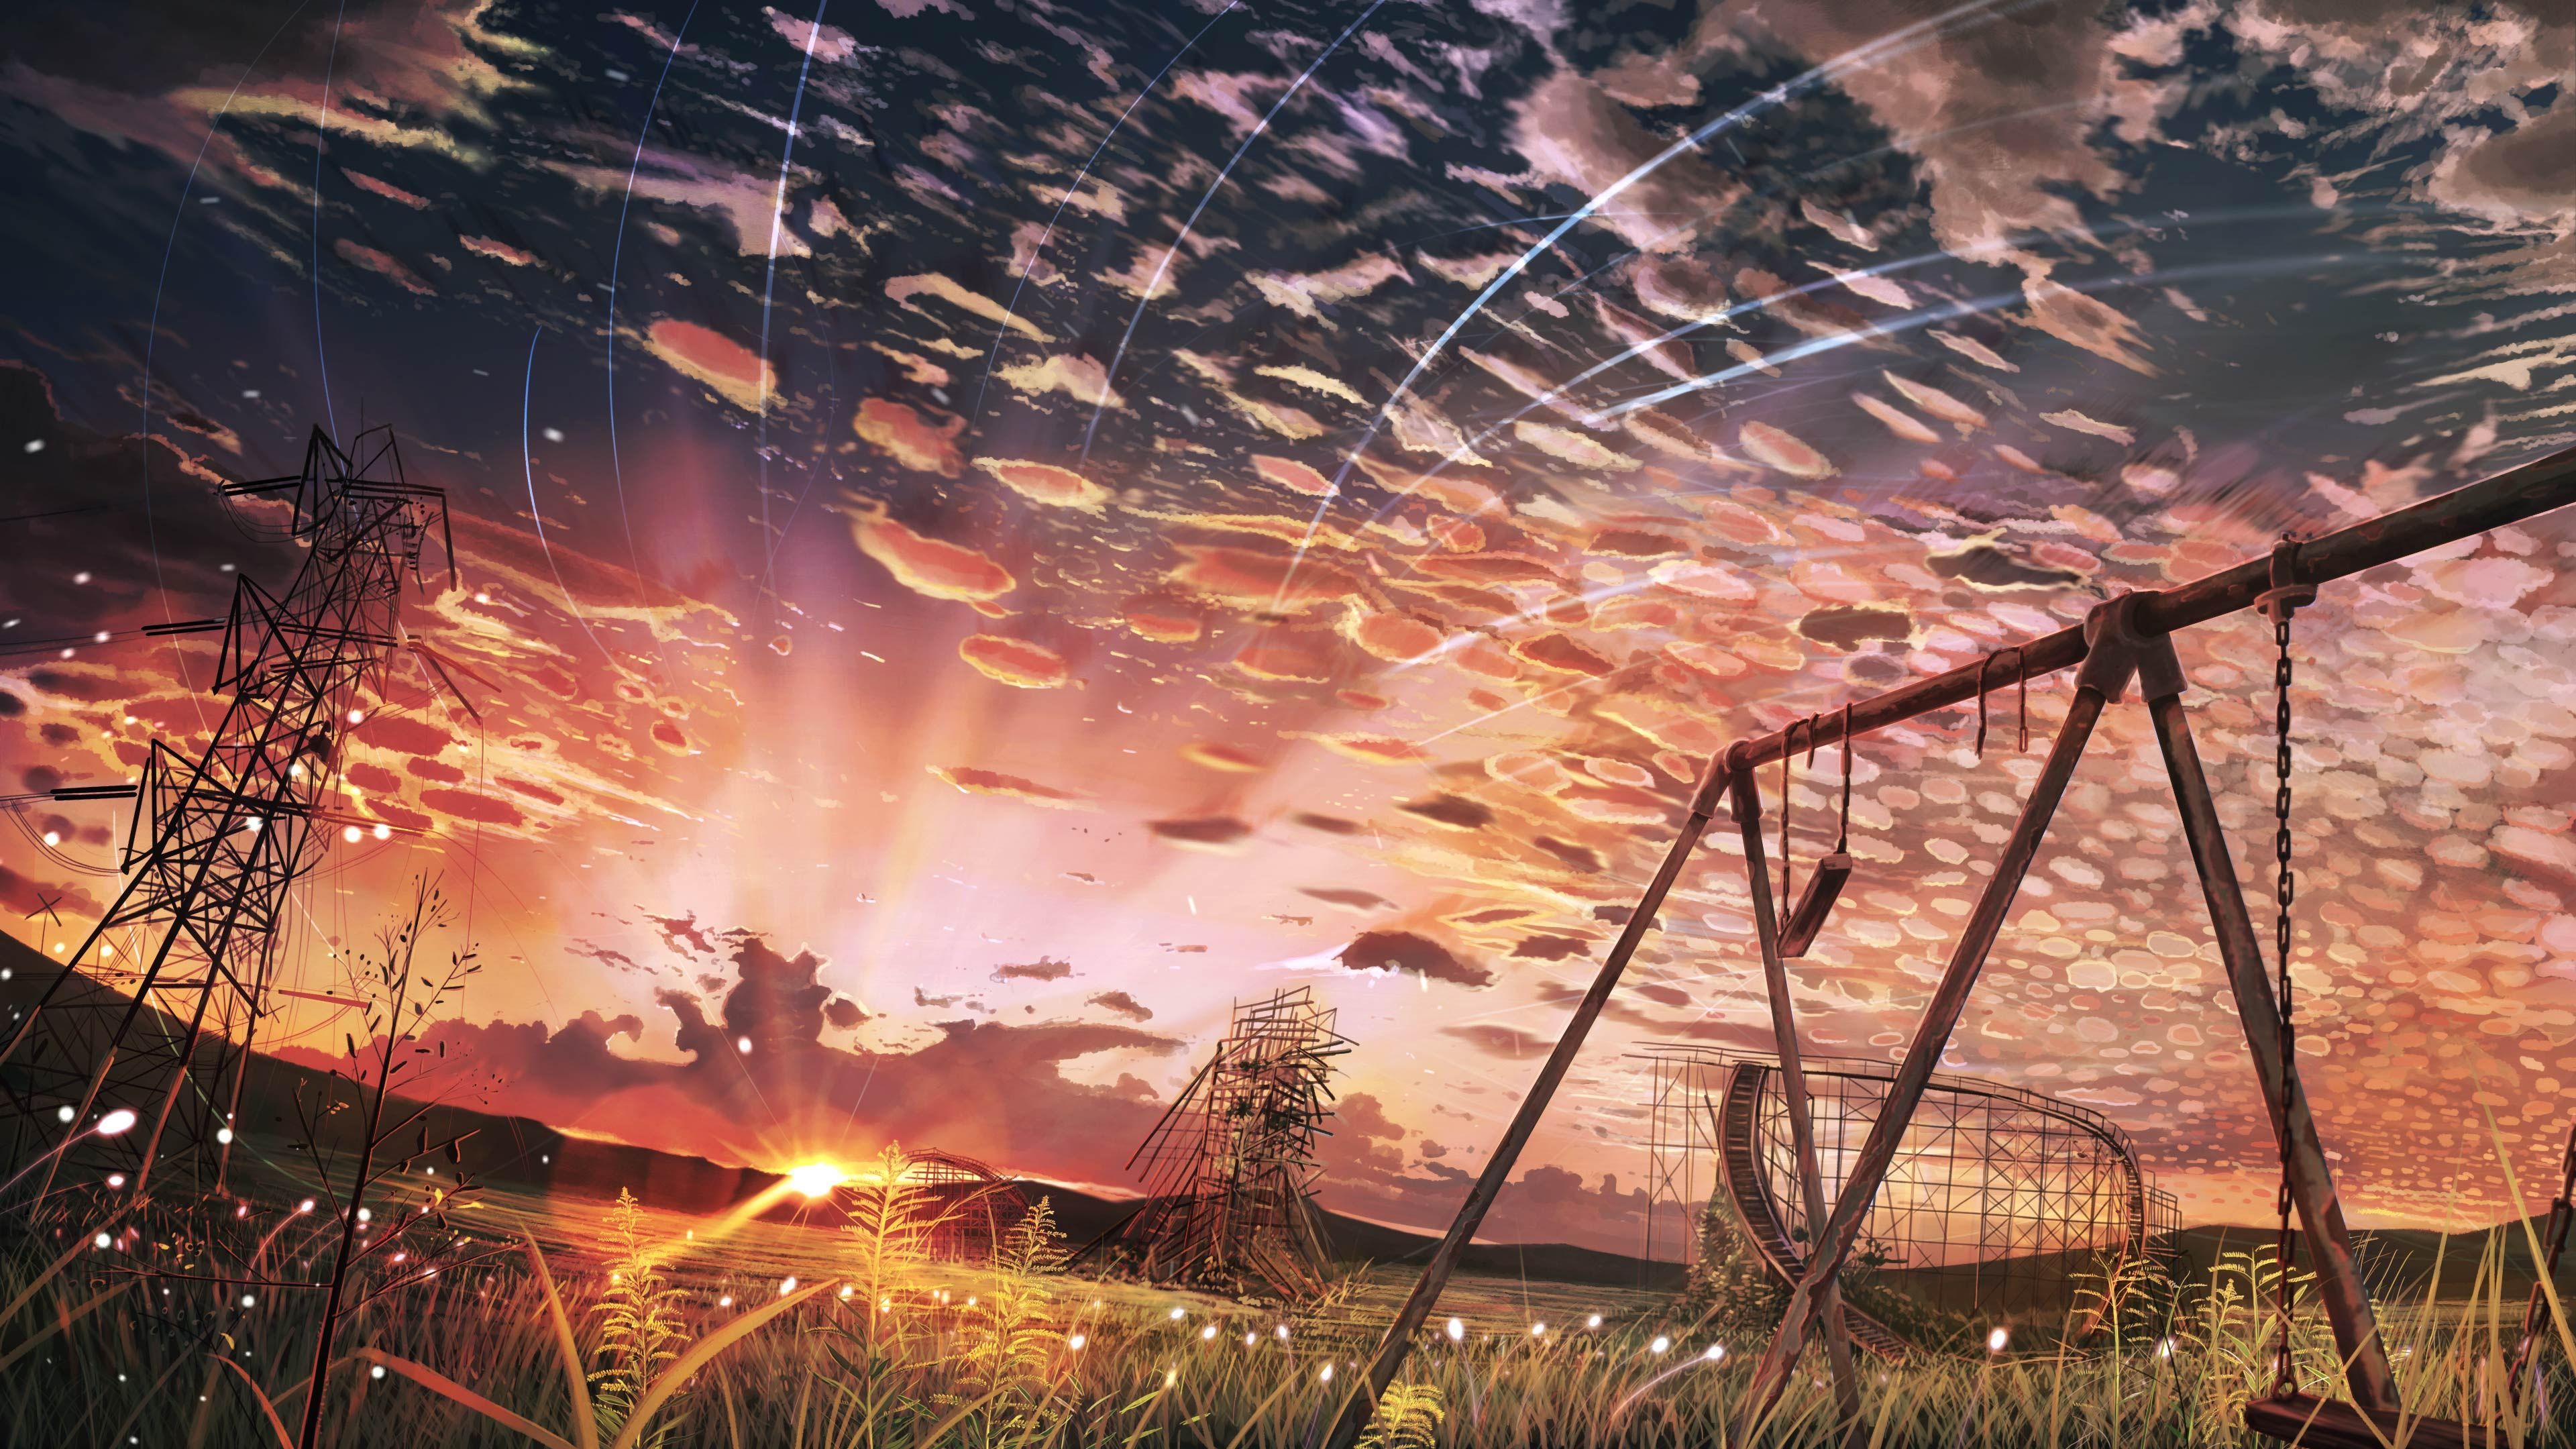 A painting of an old swing set in the middle - Anime landscape